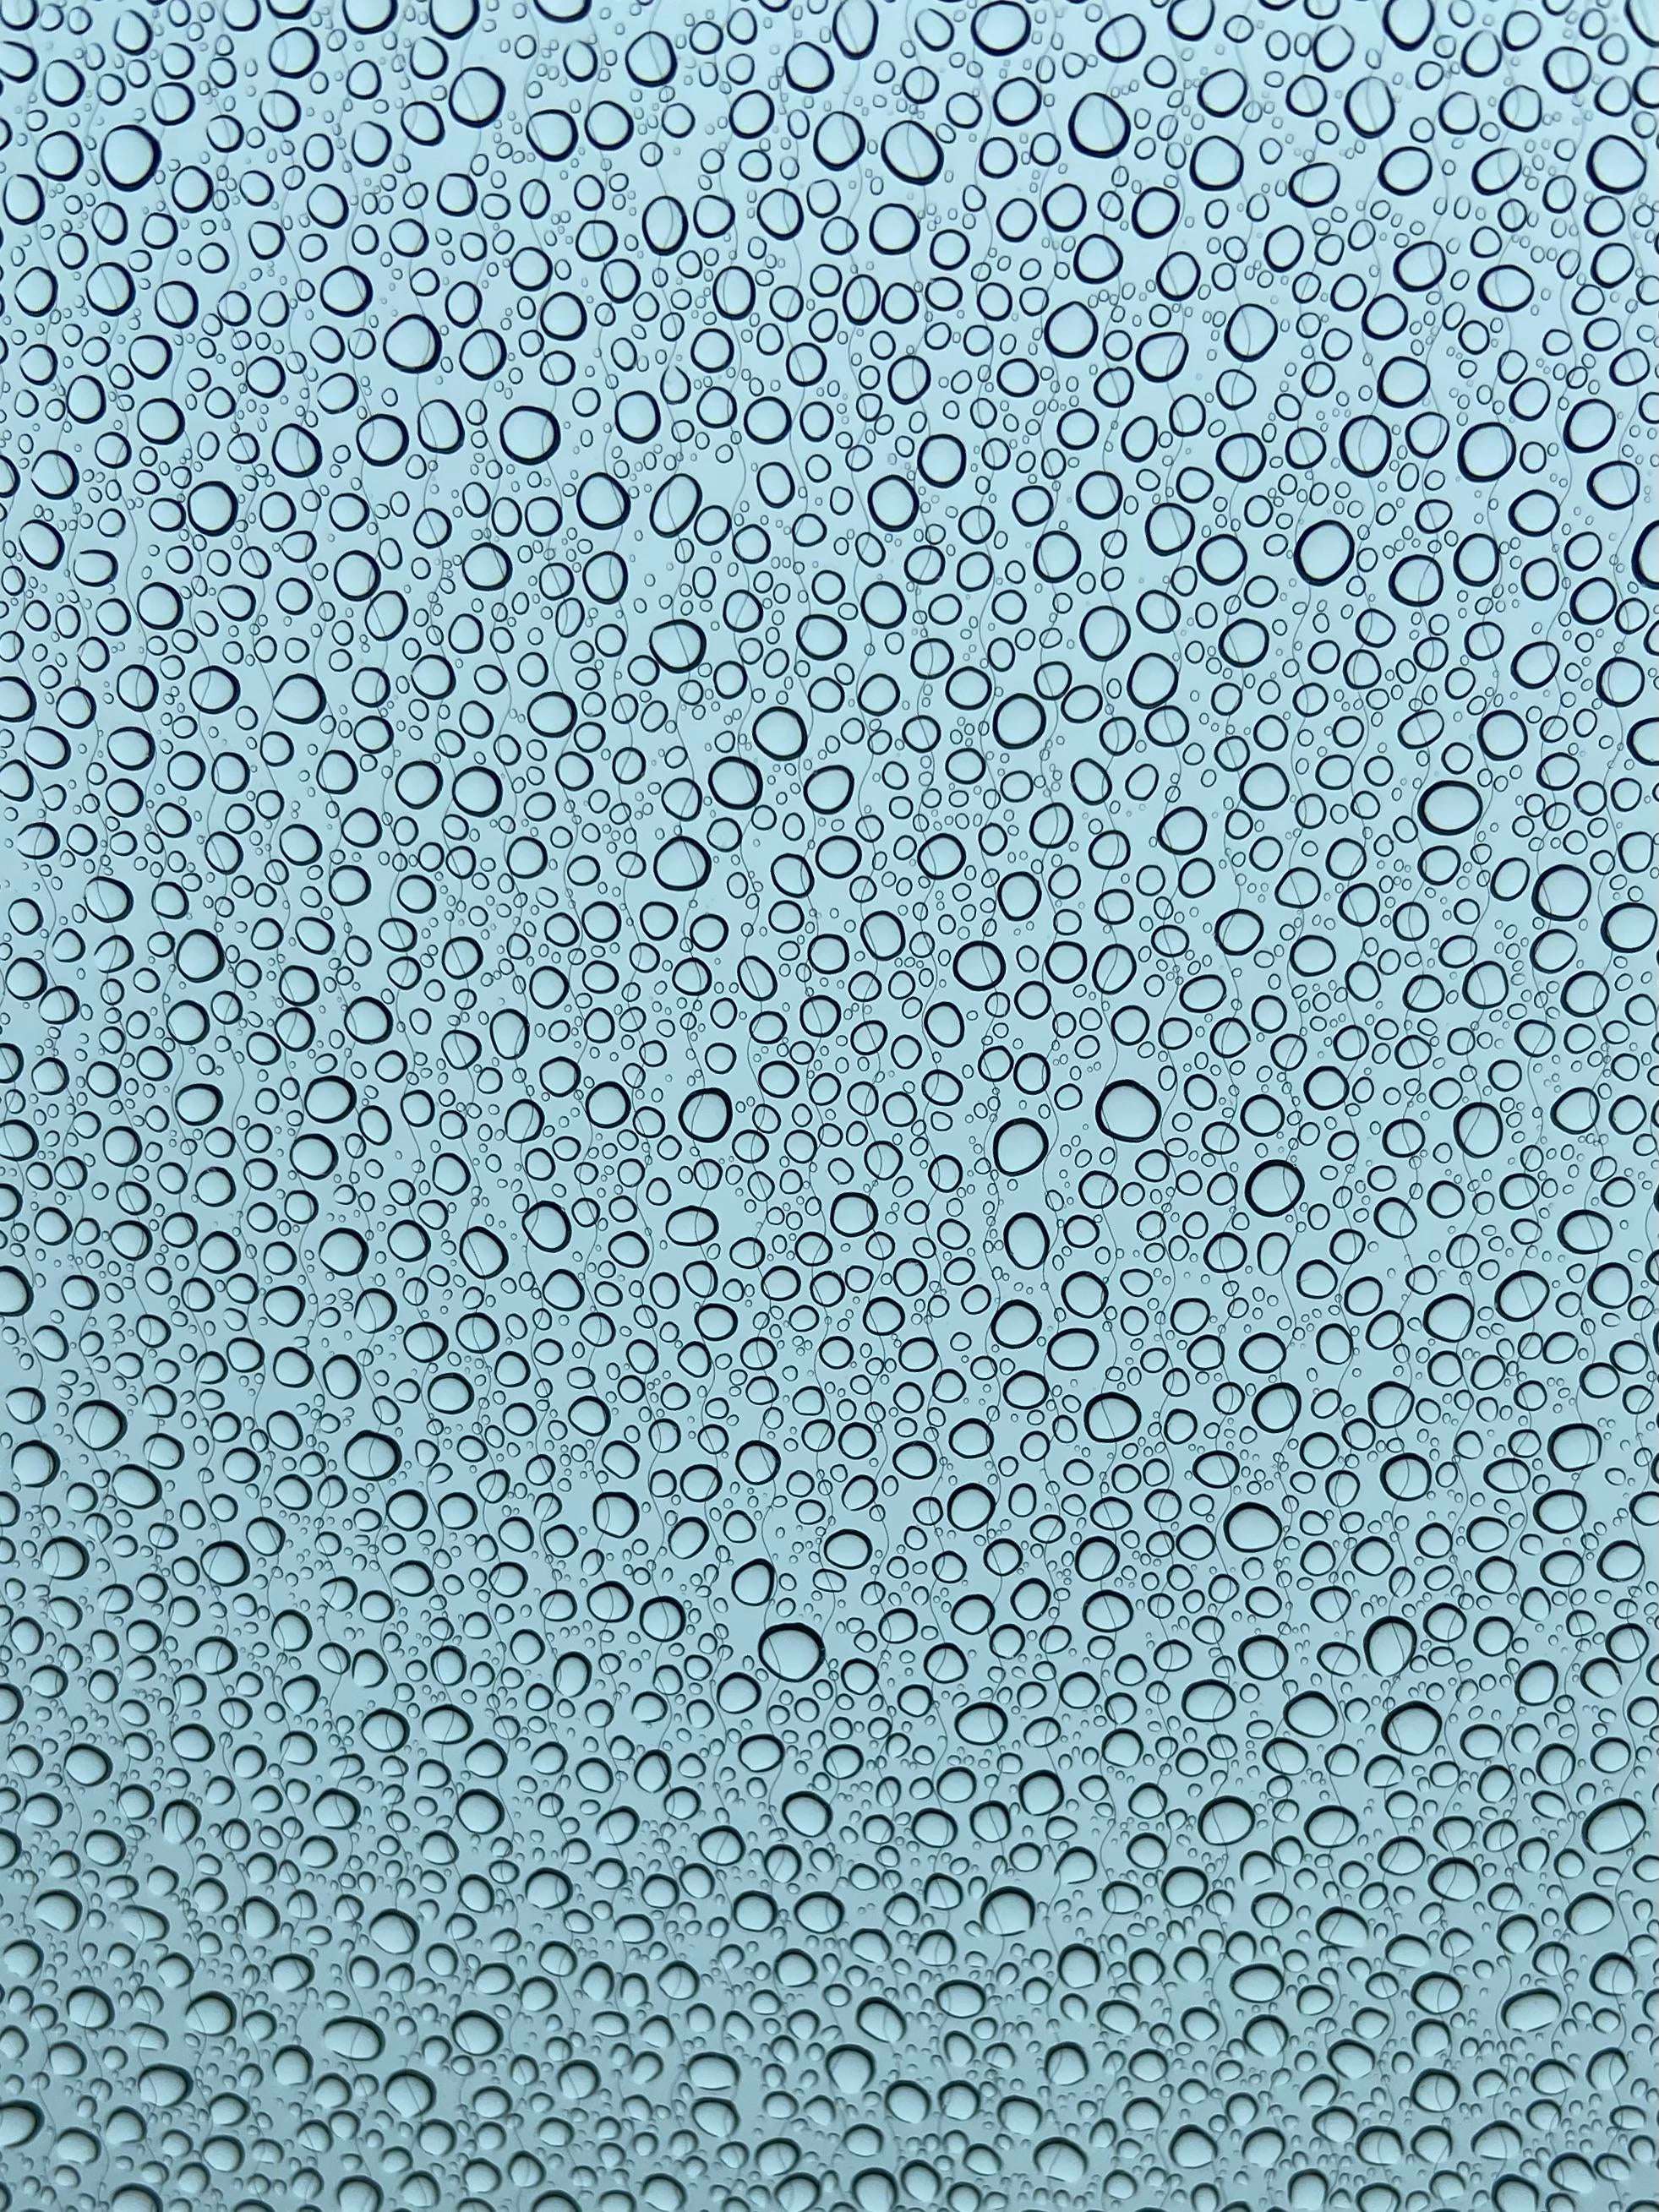 image showing ITAP of the mist on my windshield